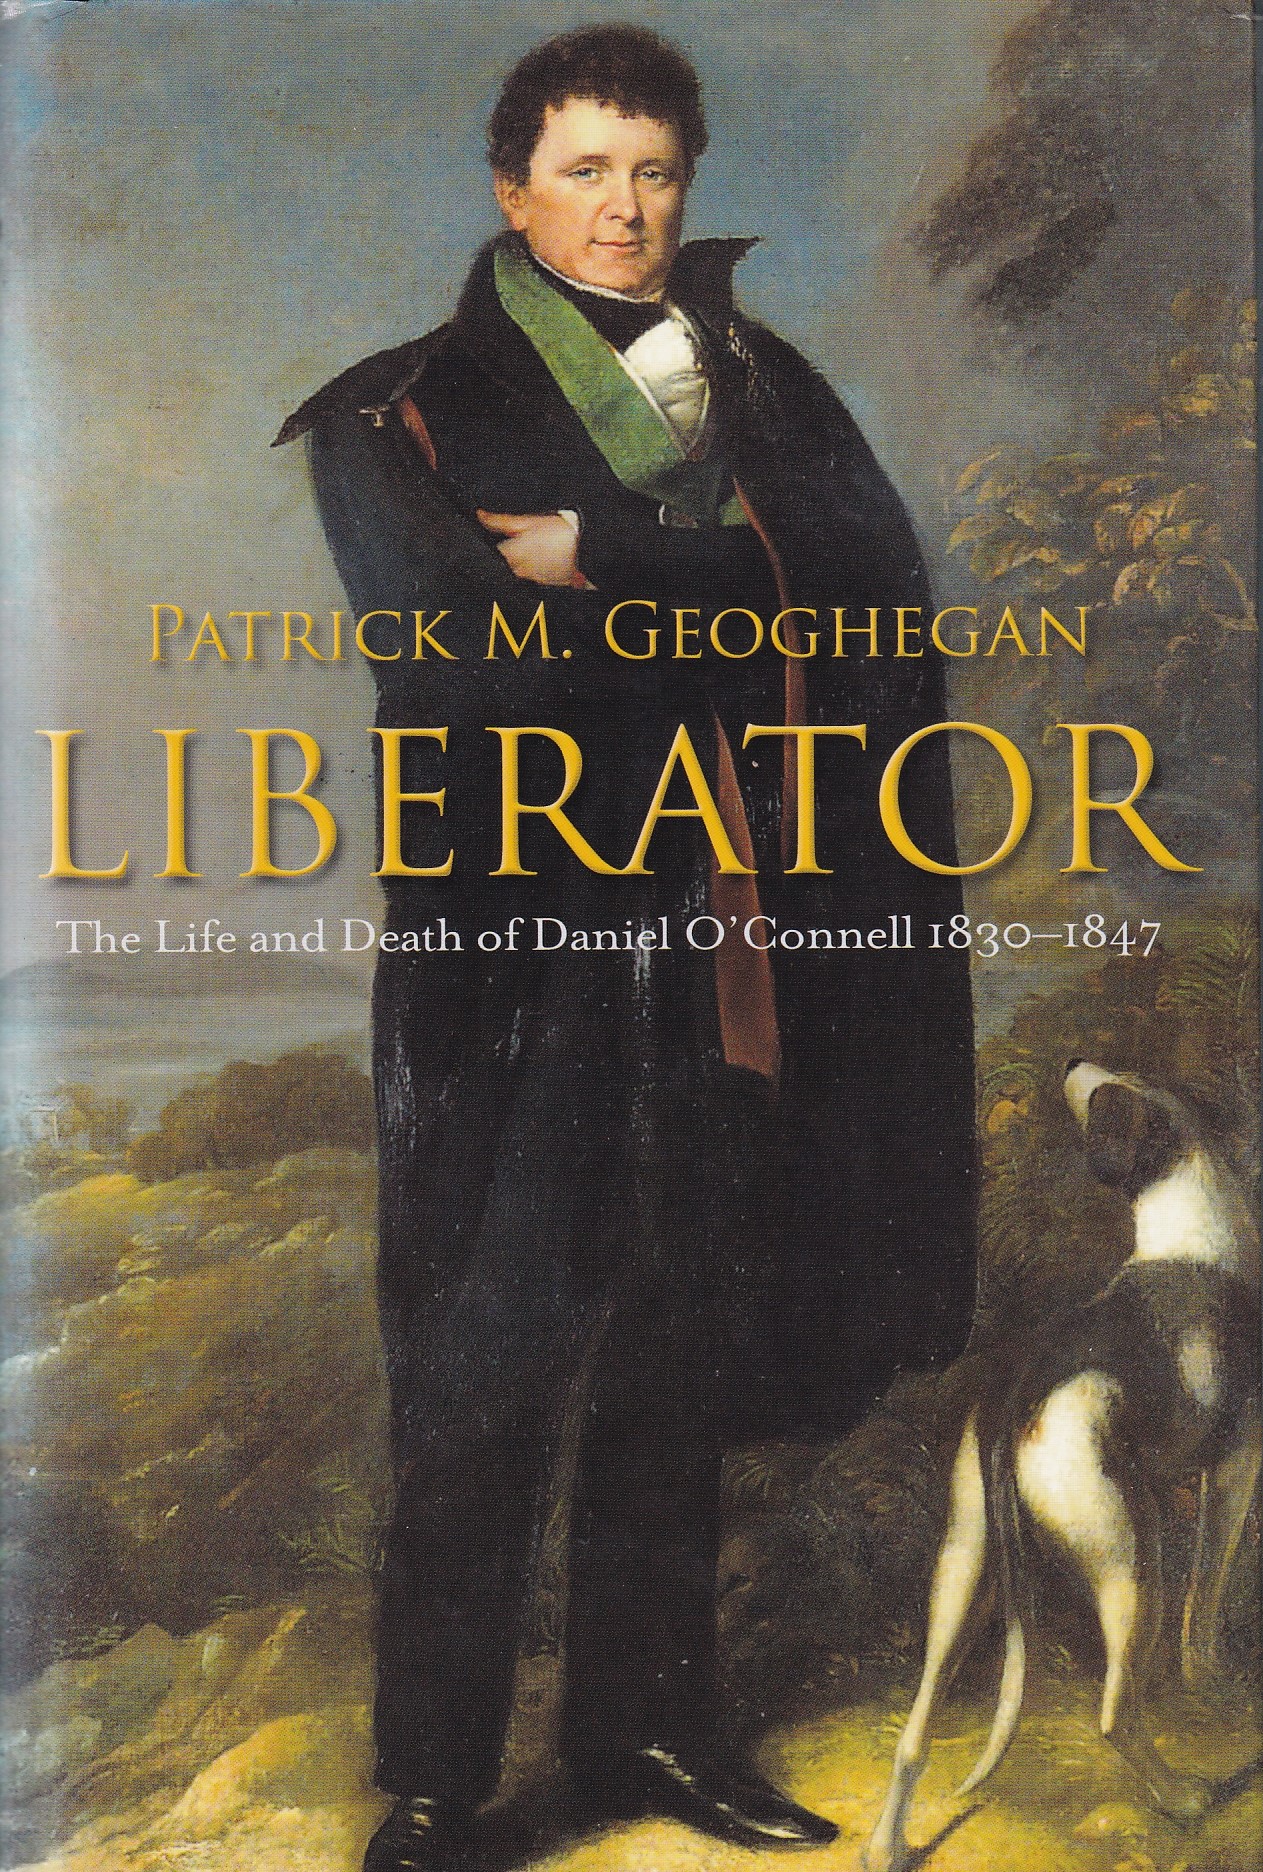 Liberator: The Life and Death of Daniel O’Connell, 1830-1847 | Patrick M. Geoghegan | Charlie Byrne's